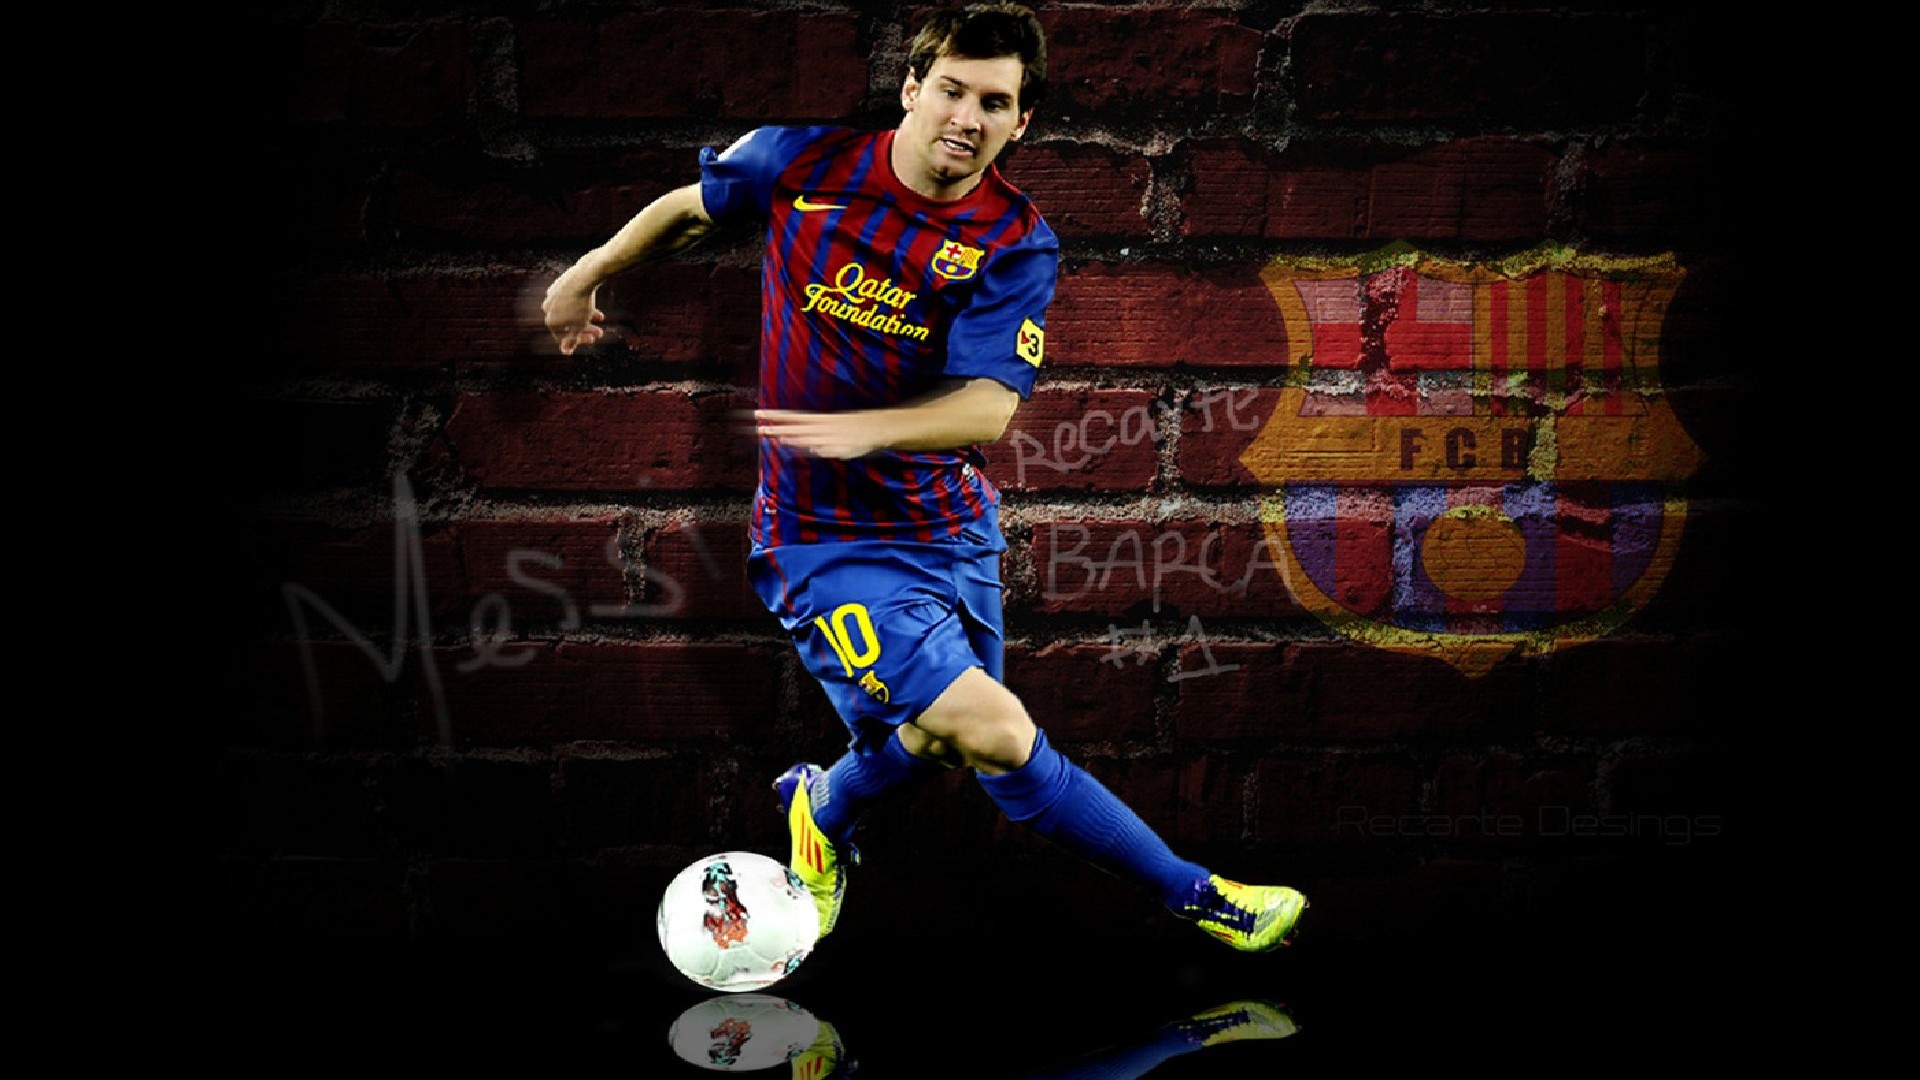 Messi Football Skills Wallpapers Players Teams Leagues 1920x1080